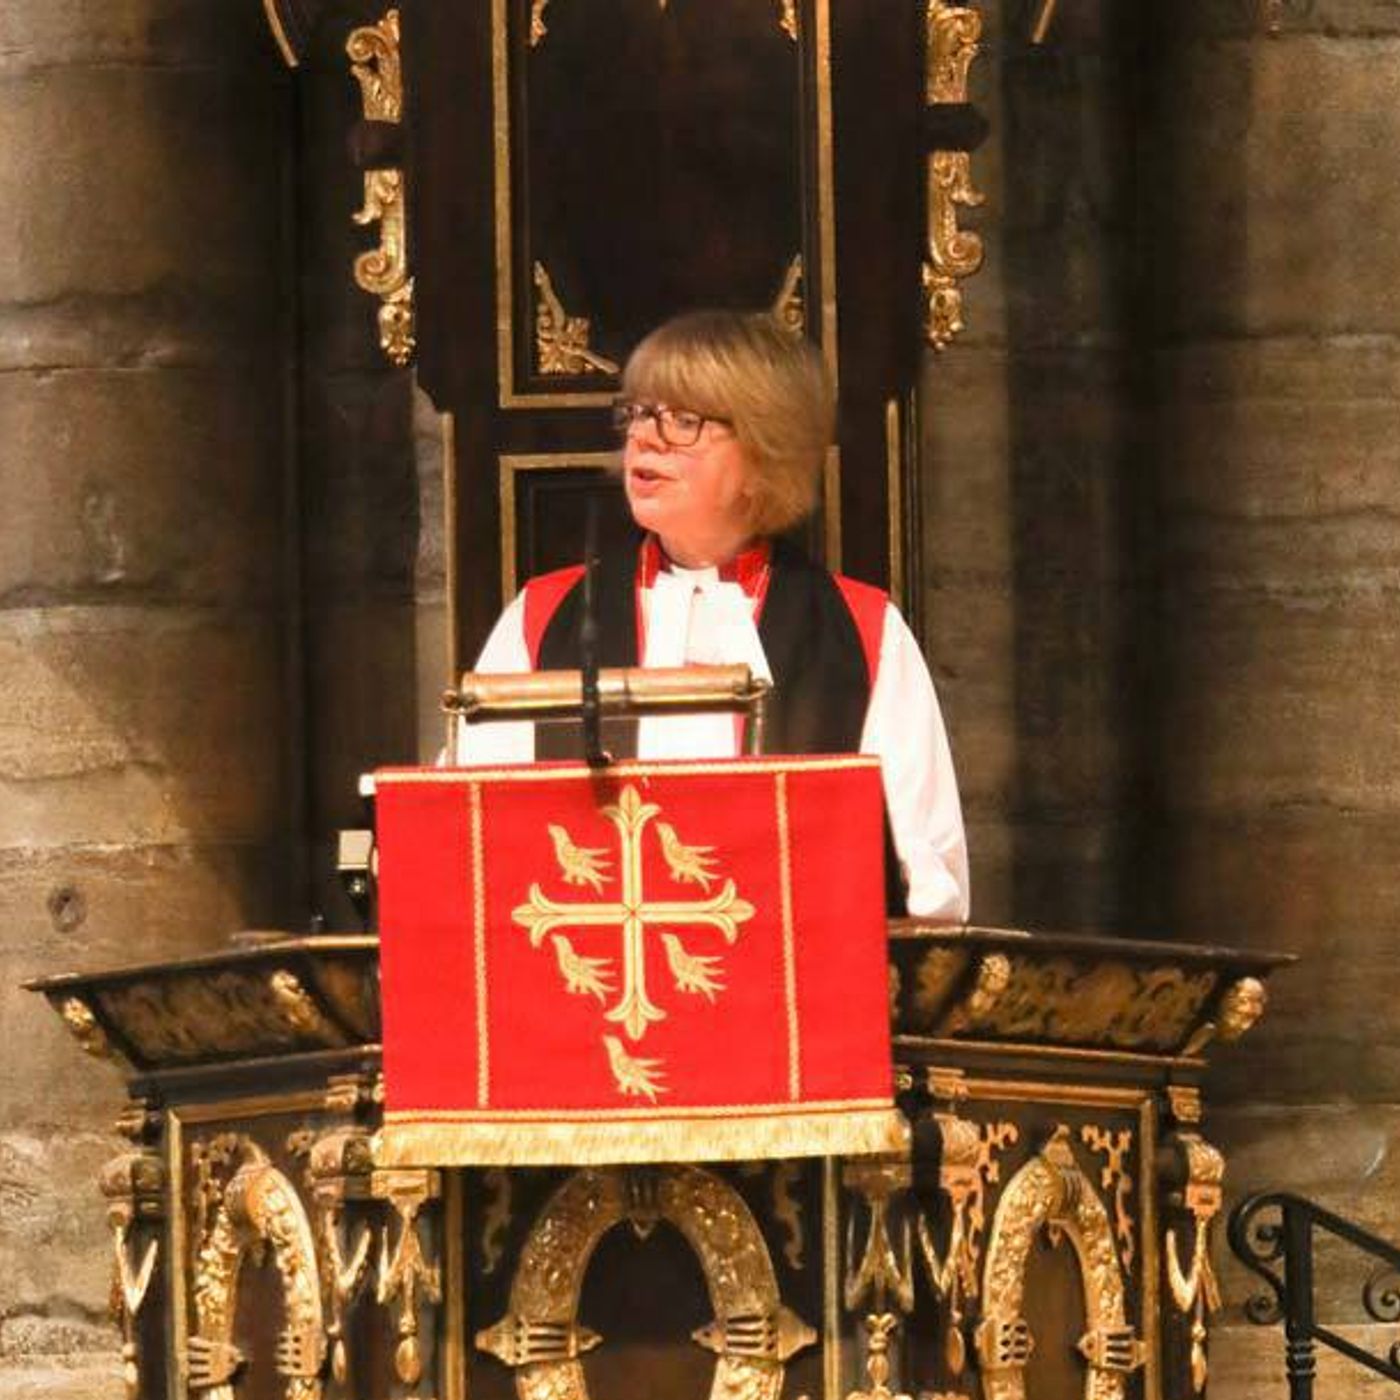 The Bishop of London’s Address at the St Cecilia service, 2019